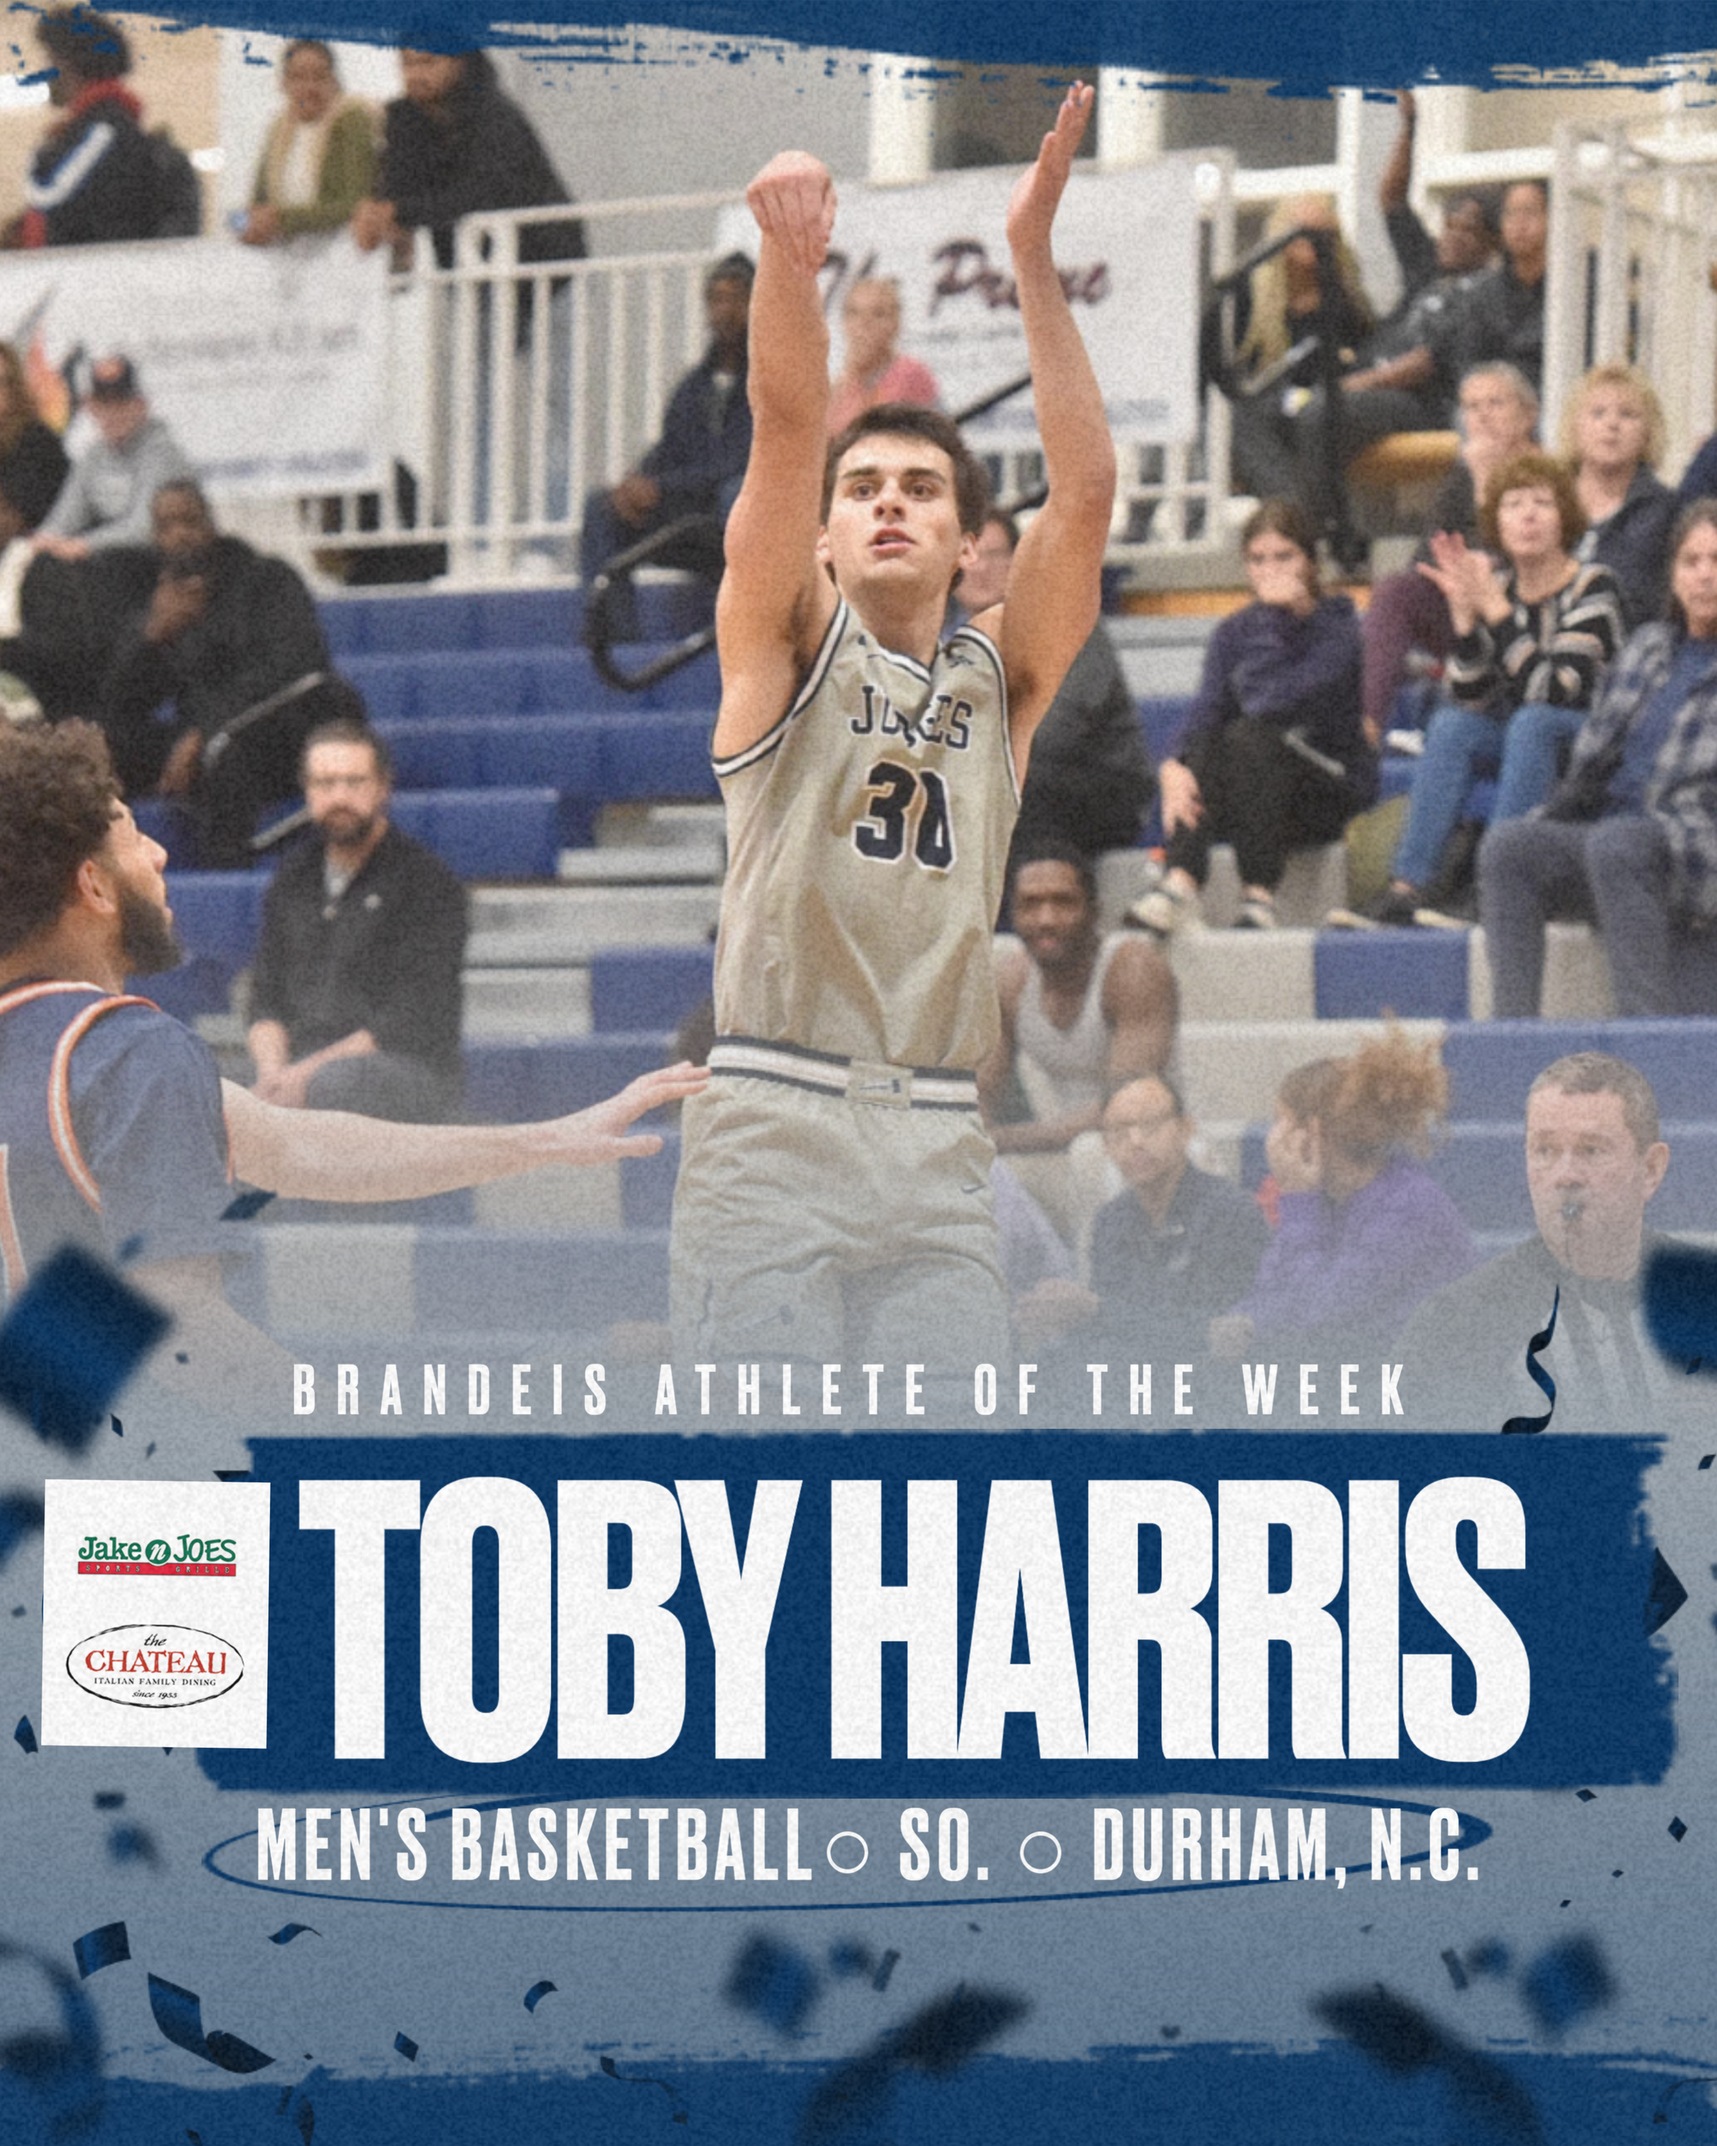 TEXT: Jake N Joes and The Chateau Brandeis Athlete of the Week, Toby Harris, Men's Basketball, So., Durham, N.C.IMAGE: Toby Harris taking a jump shot during a recent game